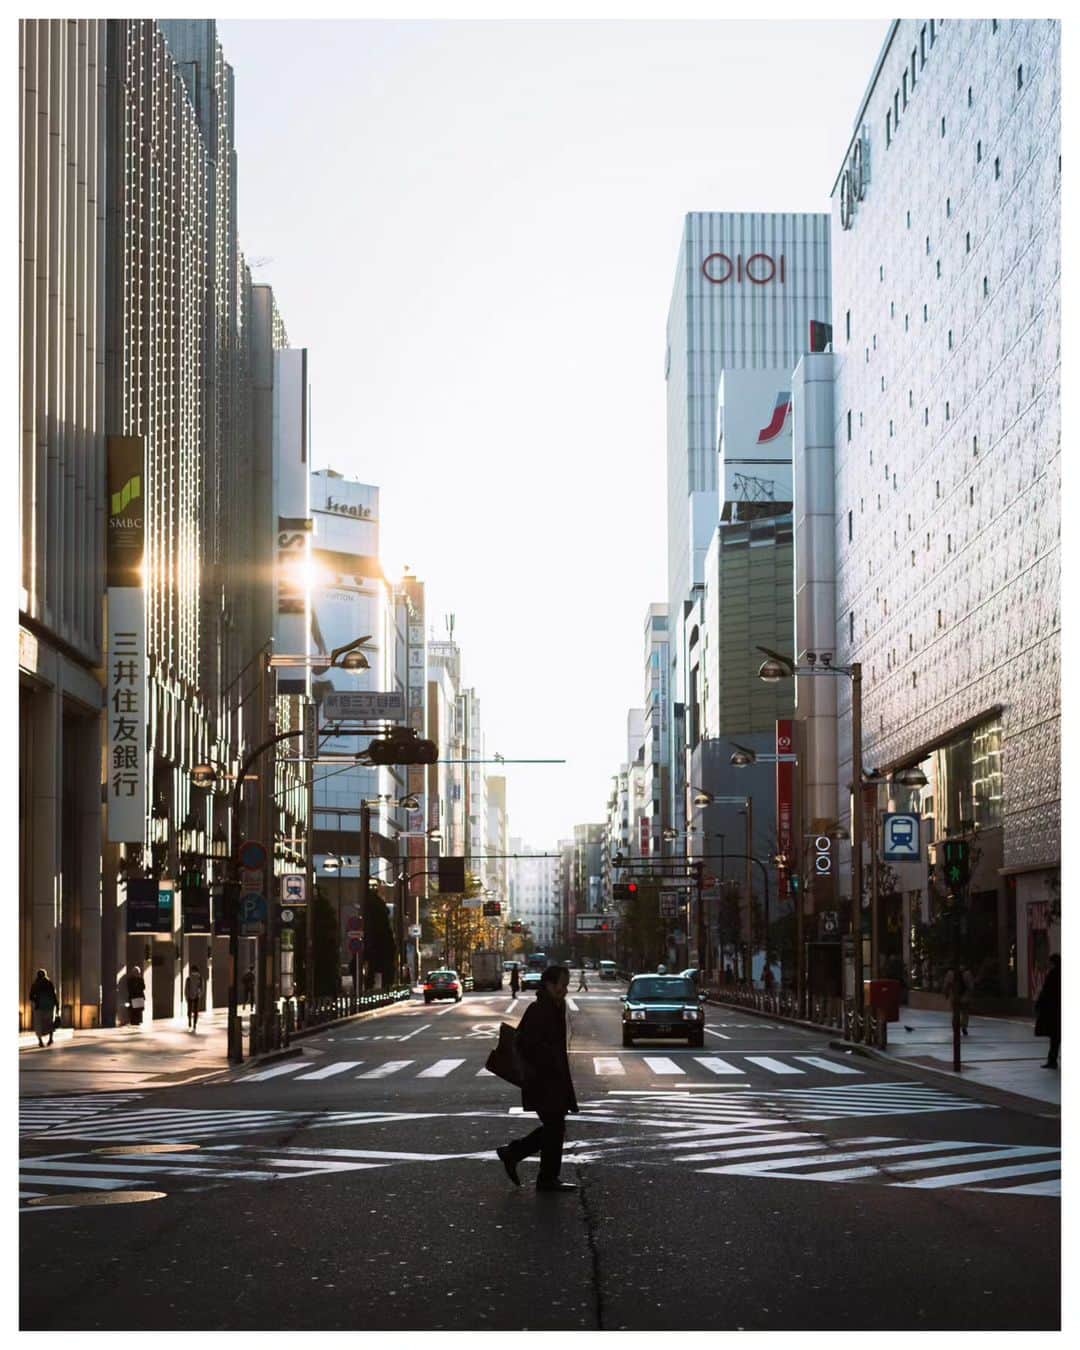 Takashi Yasuiのインスタグラム：「Tokyo 🌅 January 2015  #USETSU #TakashiYasui #SPiCollective #filmic_streets #ASPfeatures #photocinematica #STREETGRAMMERS #street_storytelling #bcncollective #ifyouleave #sublimestreet #streetfinder #timeless_streets #MadeWithLightroom #worldviewmag #hellofrom #reco_ig」